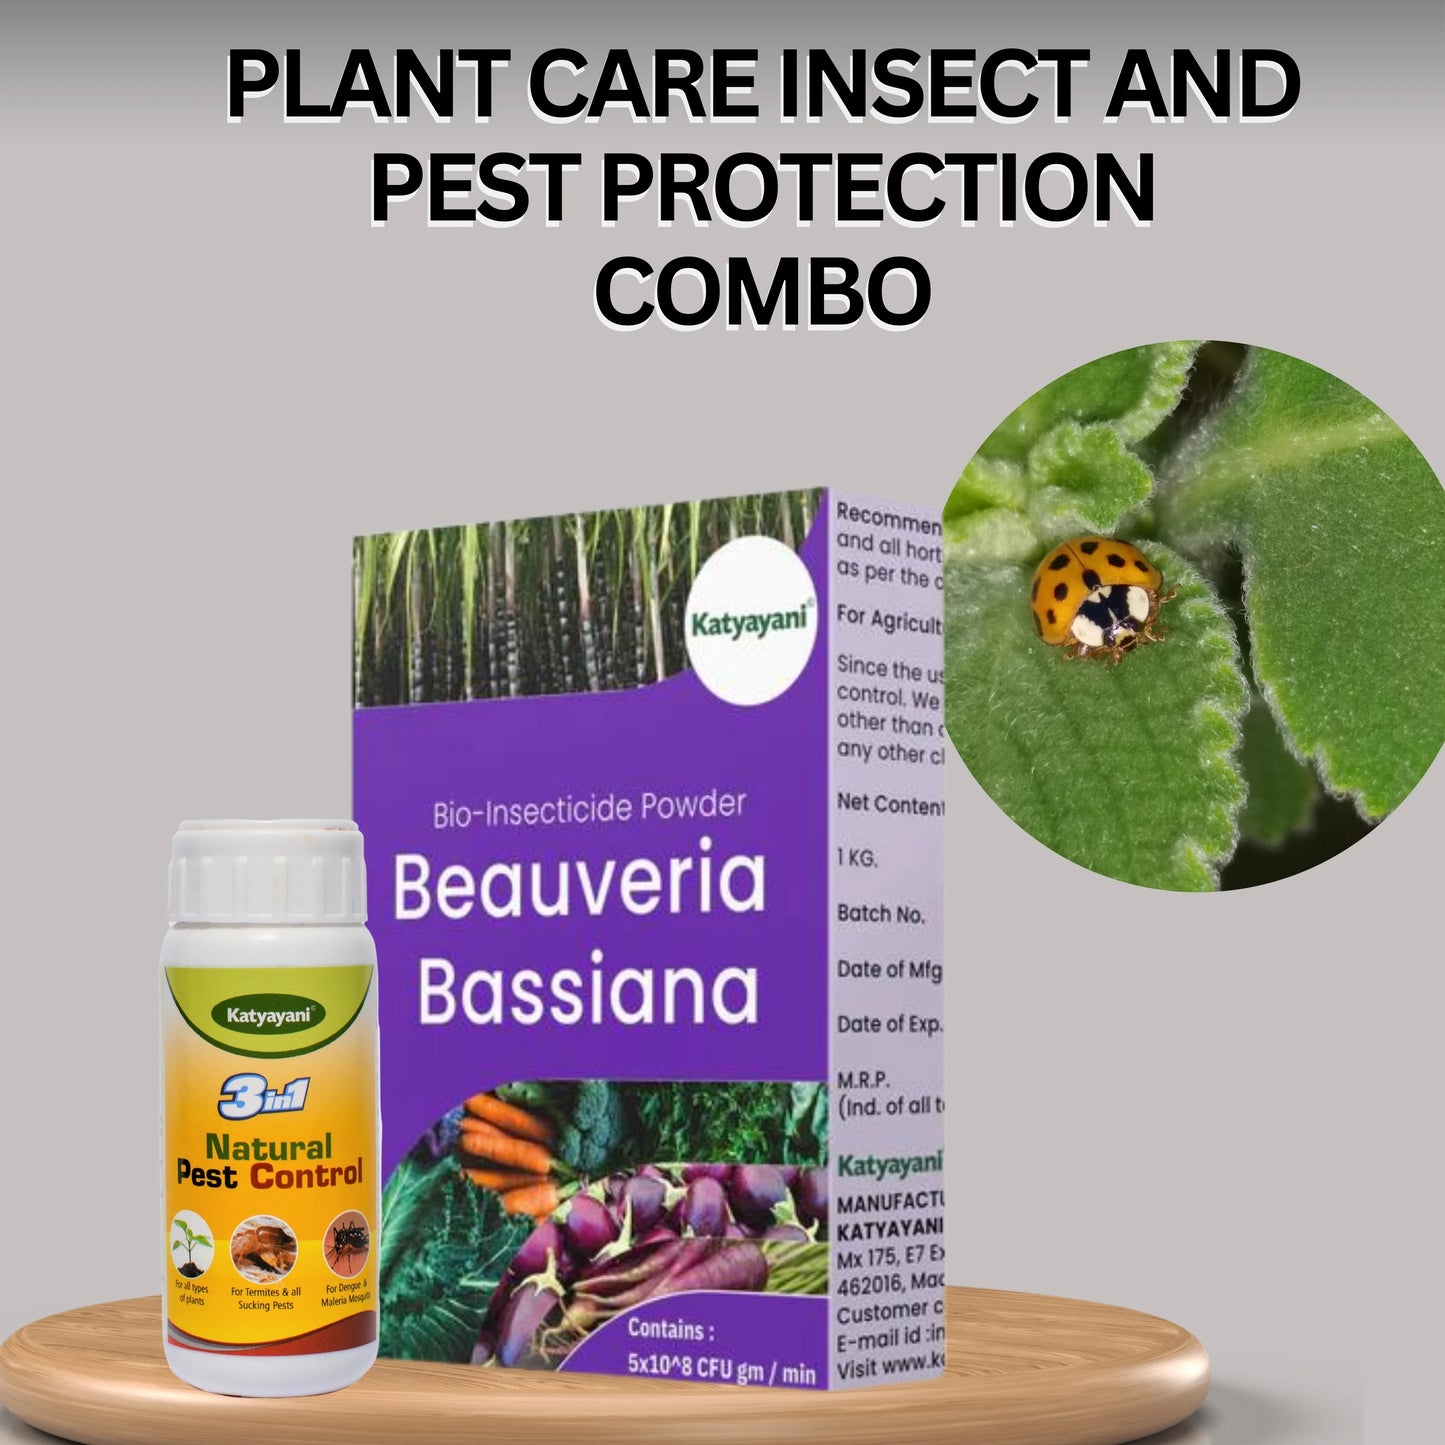 Plant care Insect And Pest Protection Combo Beauveria Bassiana Bio Insecticide Powder (1kg) with  3 in 1 Pesticide (100ml)